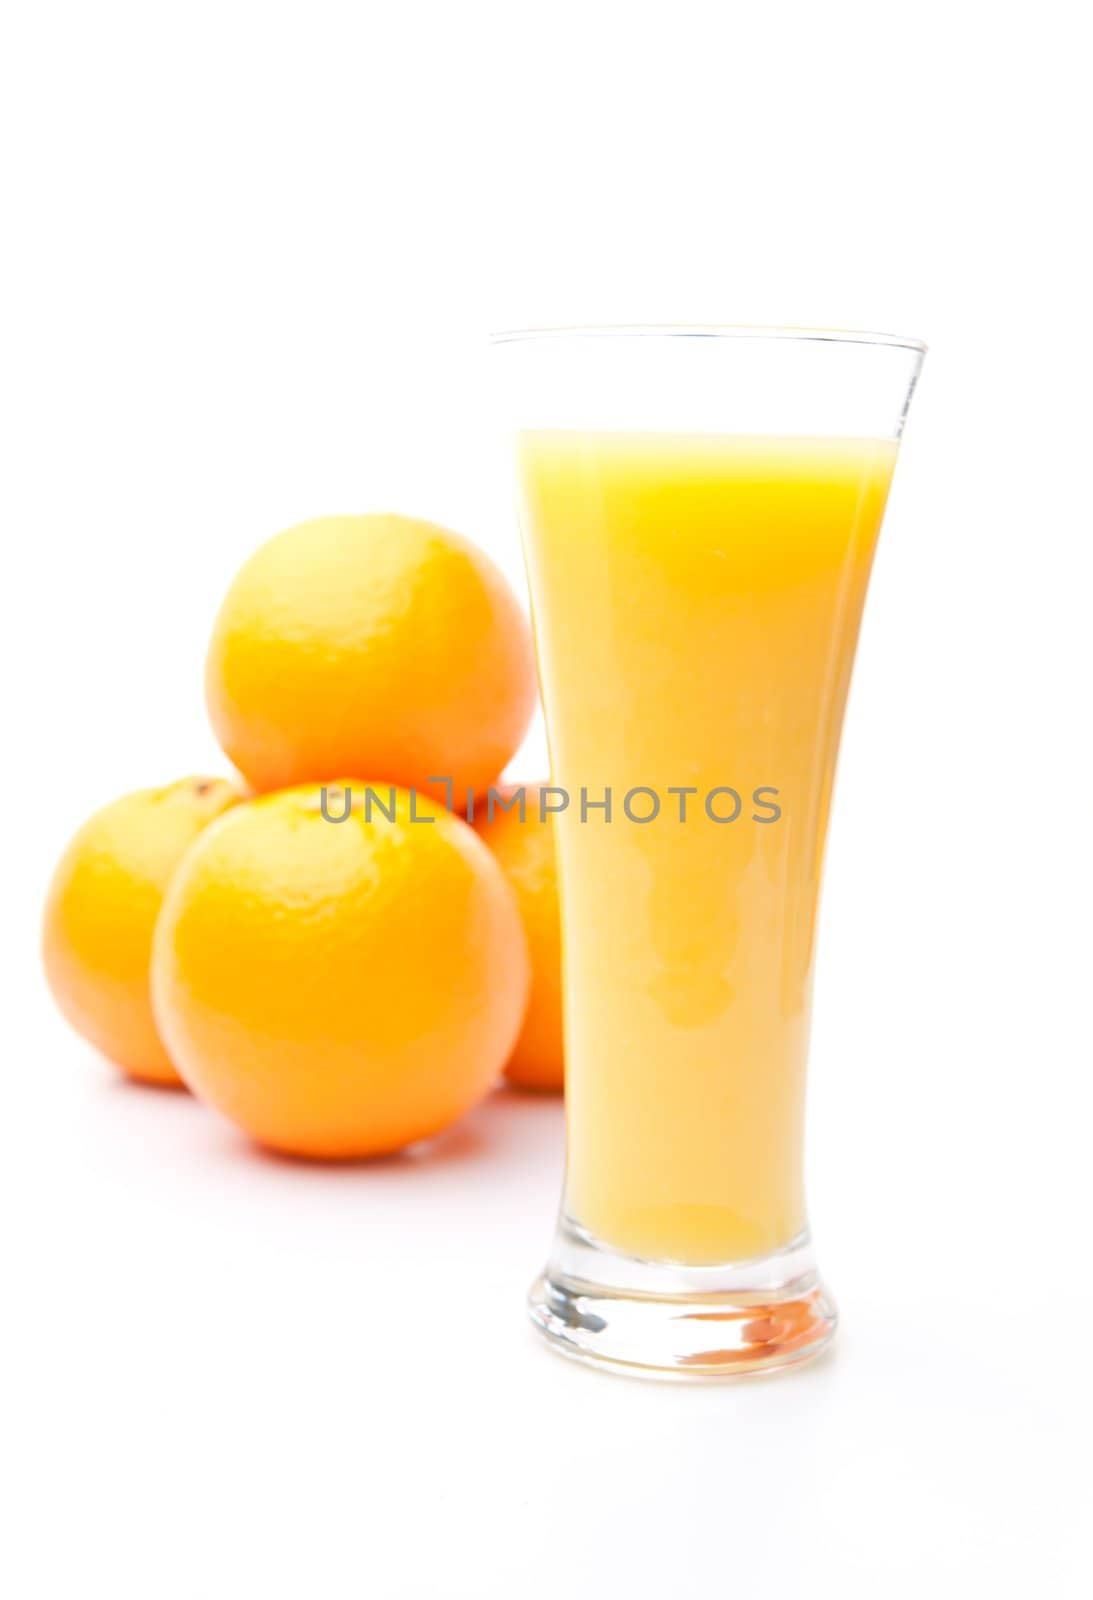 Heap of oranges behind a glass of orange juice against white background